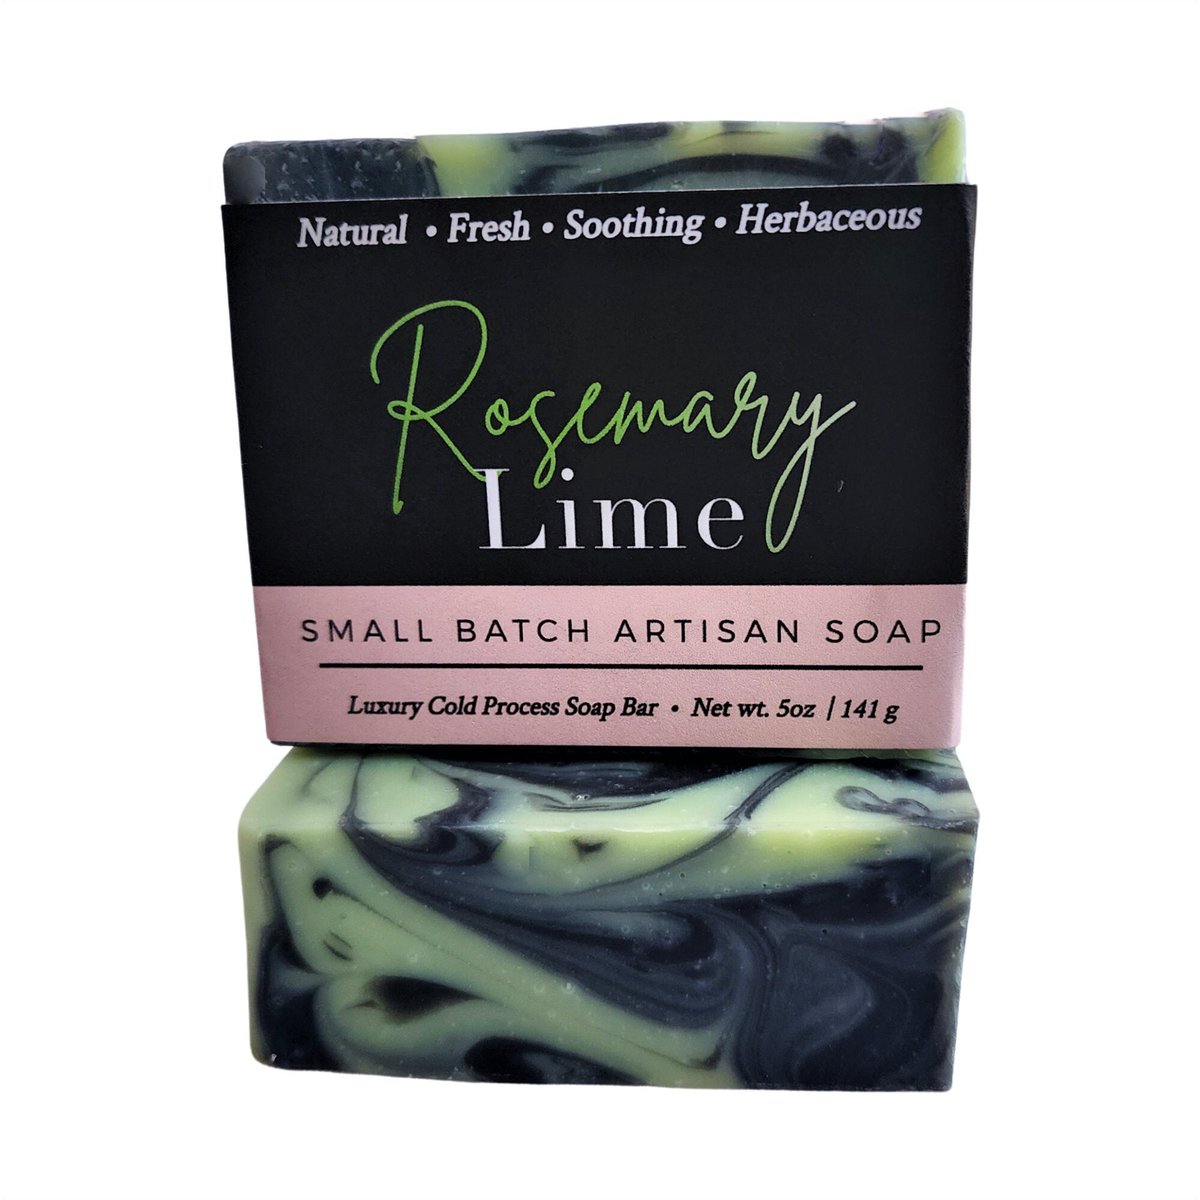 Rosemary Lime Soap, Rosemary Soap, Lime Soap, Natural Soap, Vegan Soap, Cold Process Soap, Artisan Soap, Soap Gift, , Valentine's Day Gift tuppu.net/ba08cb34 #gifts #soap #Soapgift #Christmasgifts #selfcare #DeShawnMarie #vegan #shopsmall #Etsy #RosemarySoap